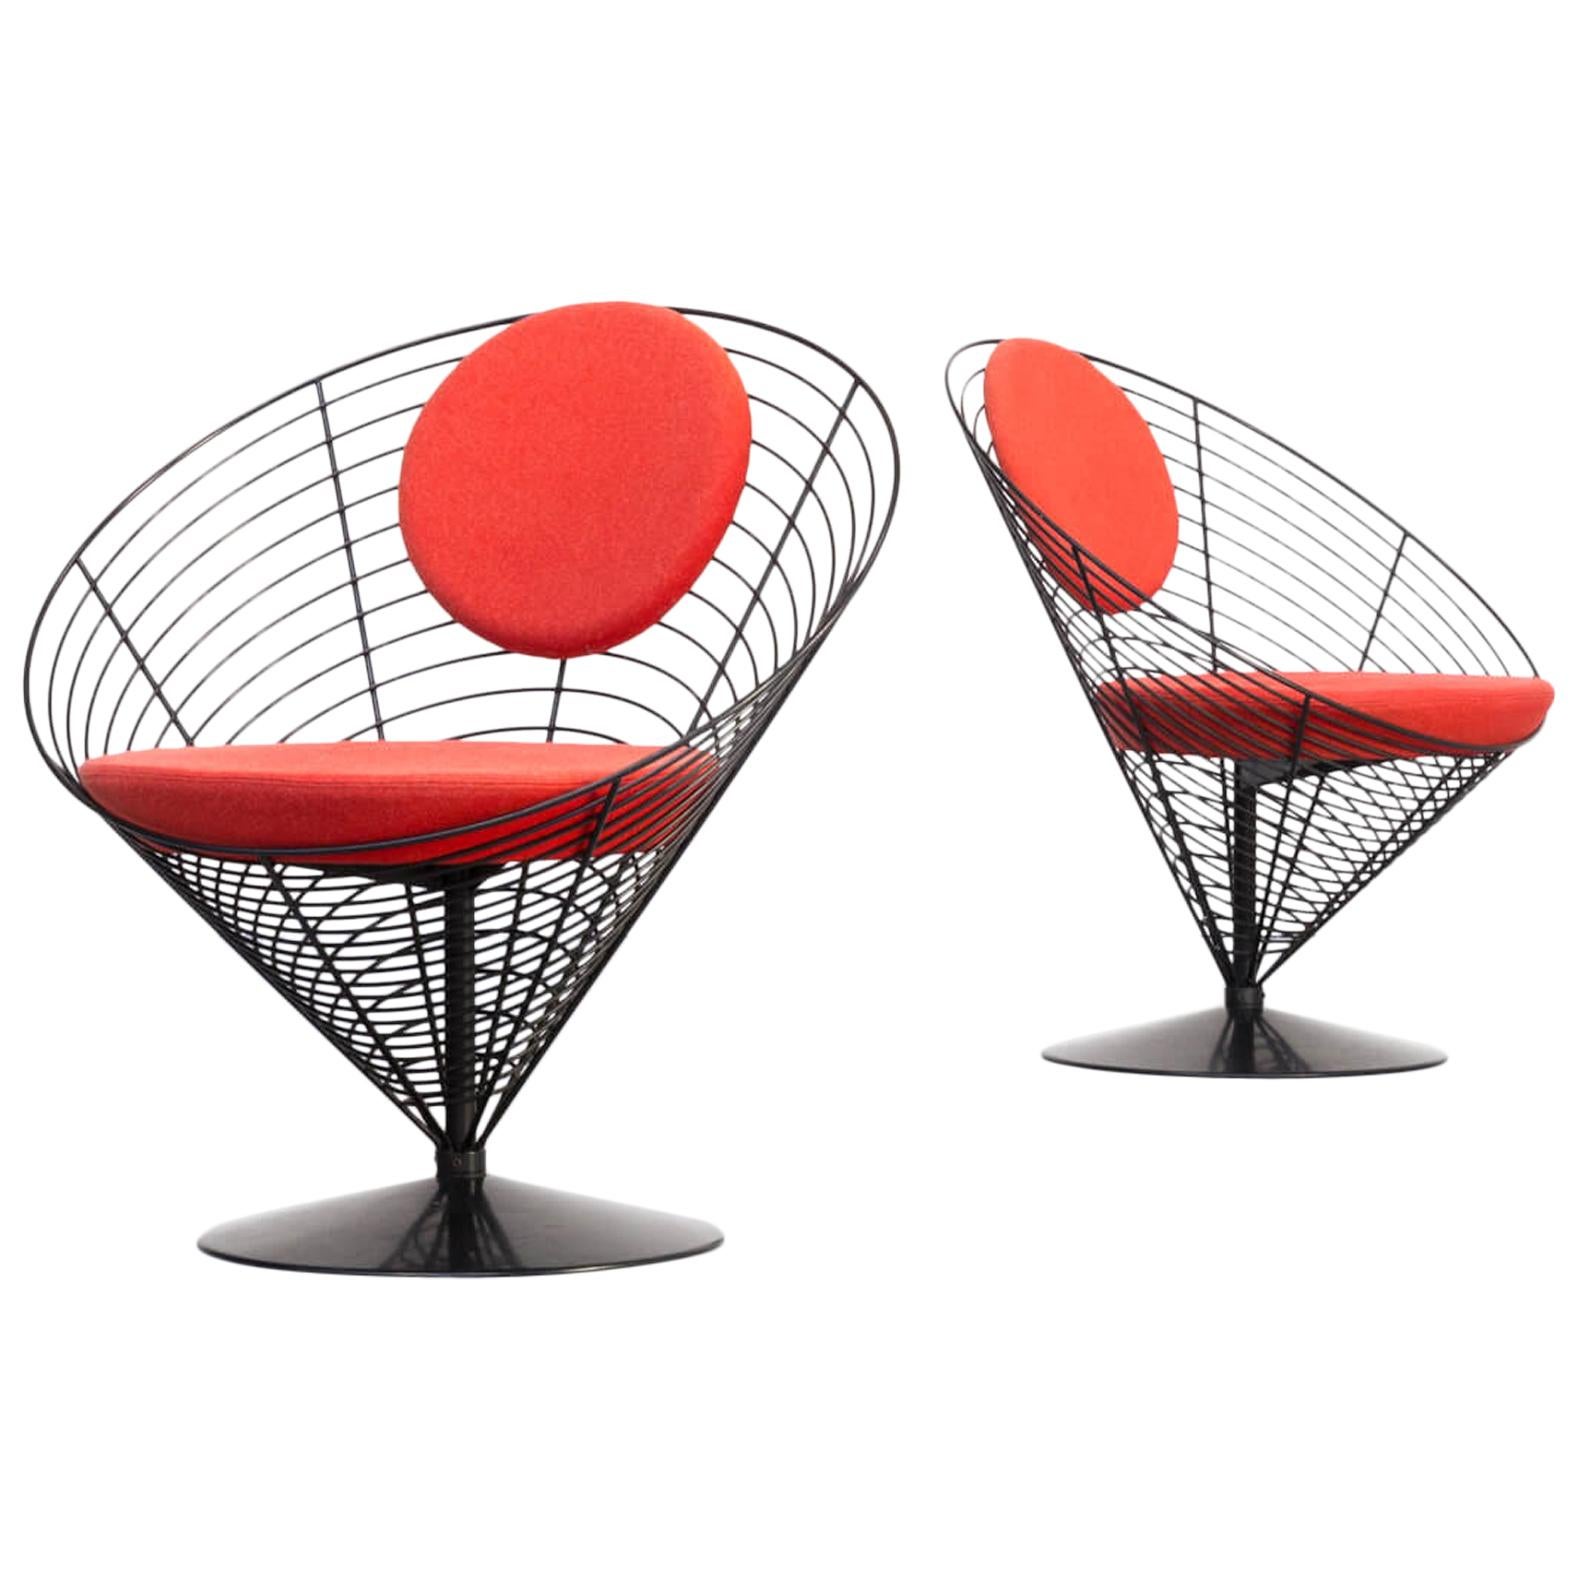 1980s Verner Panton Cone Chair for Fritz Hansen, Set of 2 For Sale